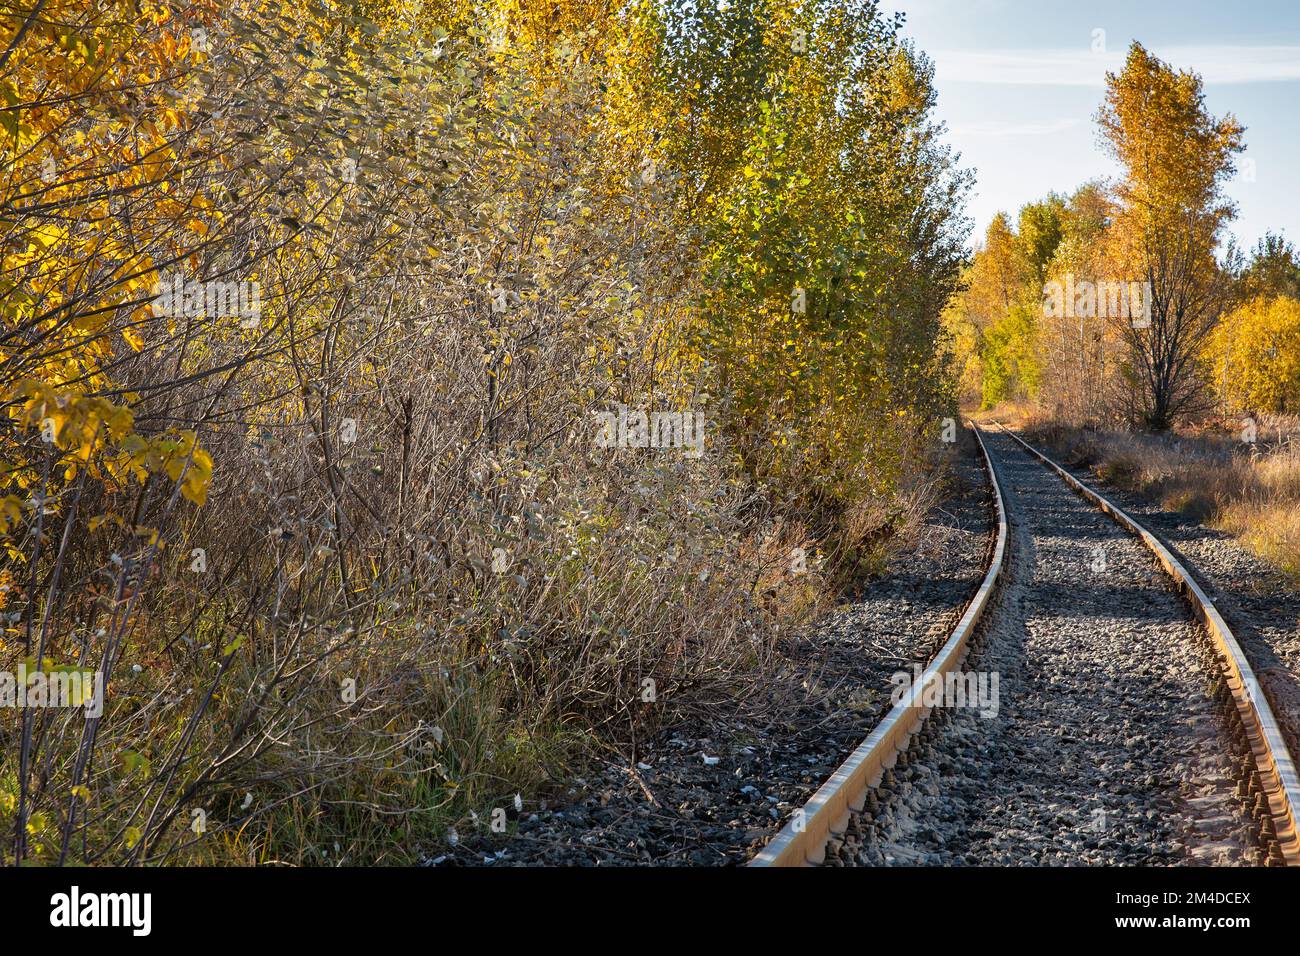 Landscape with railway track going into the autumn forest Stock Photo